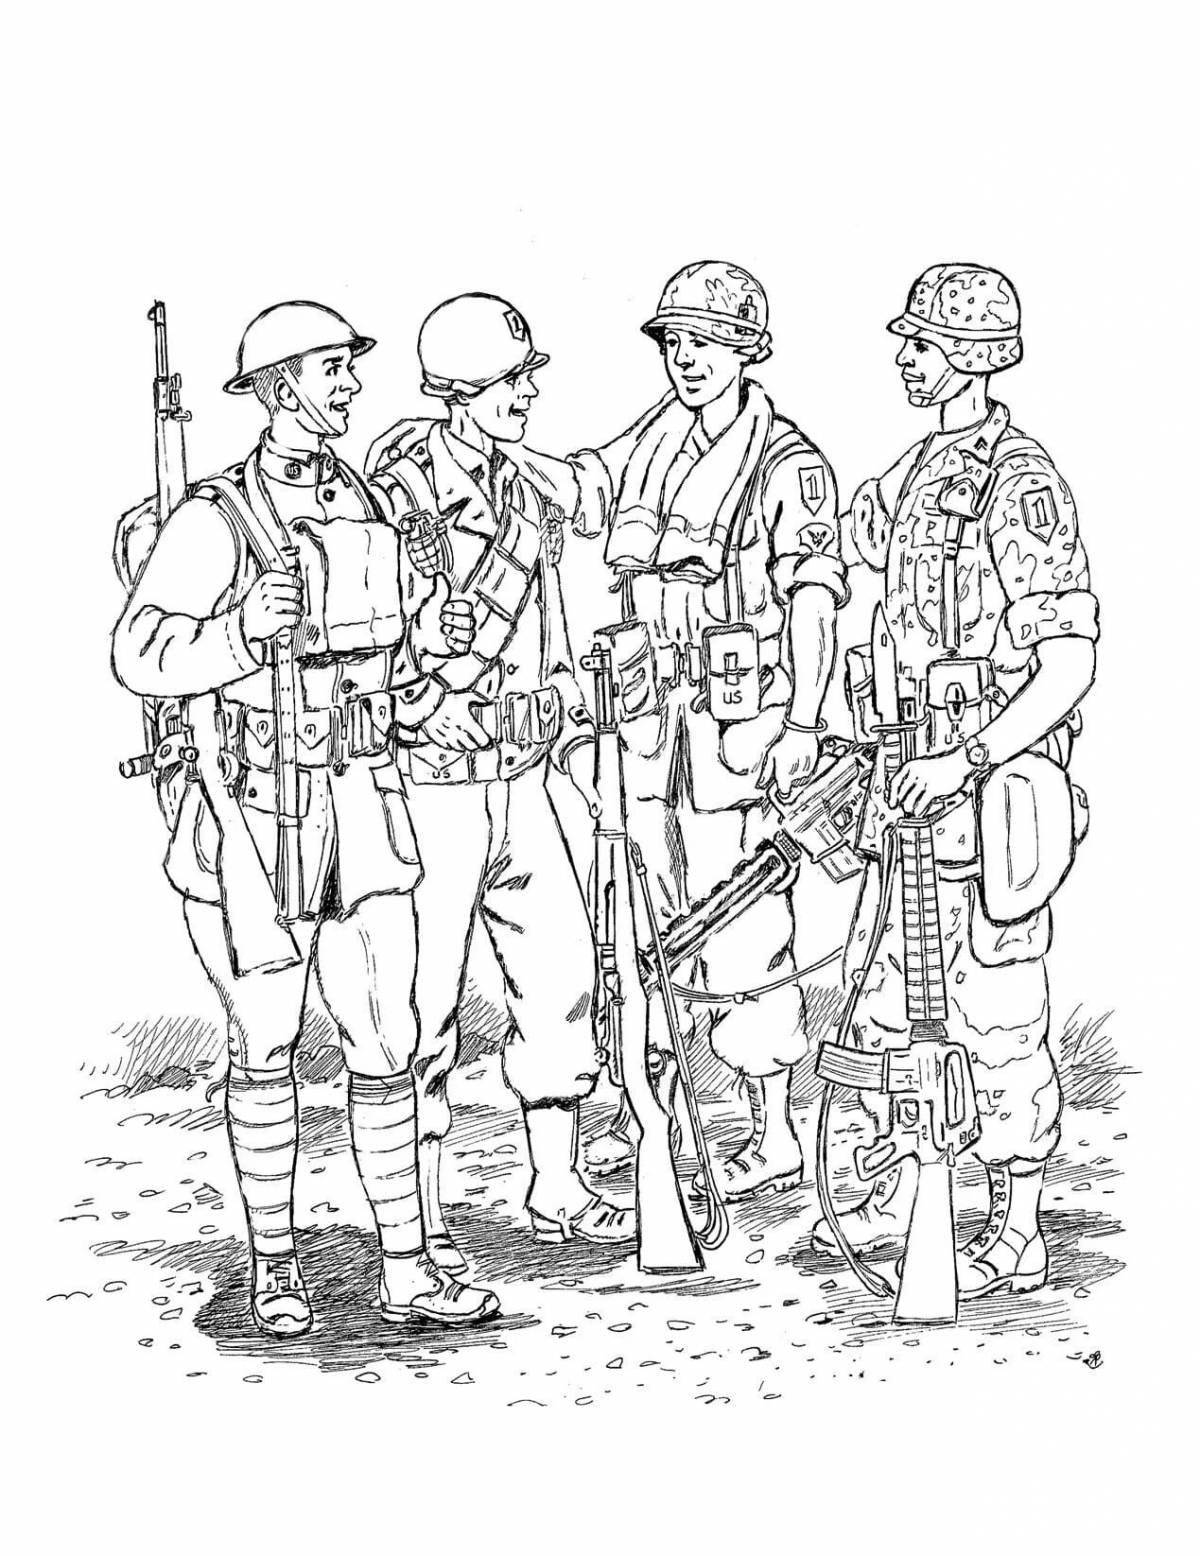 Coloring for boys with colorful toy soldiers